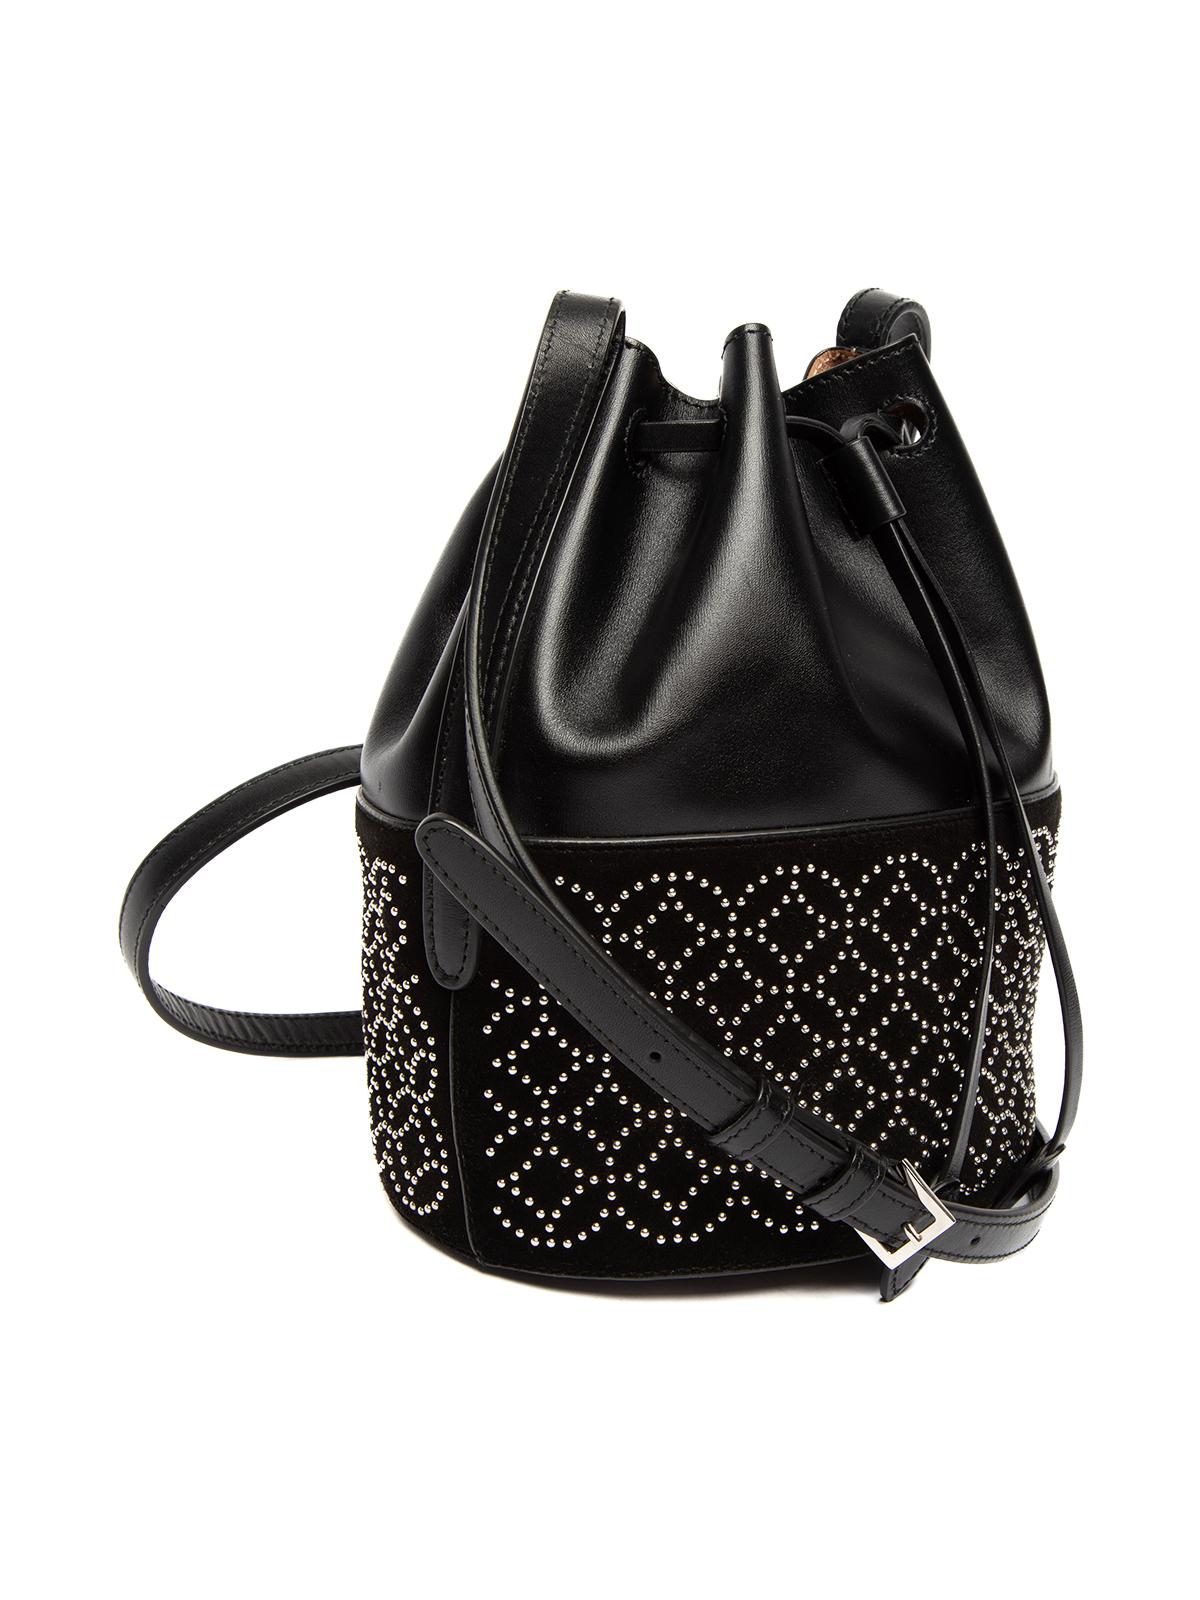 CONDITION is Very good. No visible wear to bag is evident on this used Alaia designer resale item. Details Colour - black Material leather Style - bucket bag Handles/Straps - leather Additional straps or carry options - shoulder/crossbody Mirror tag